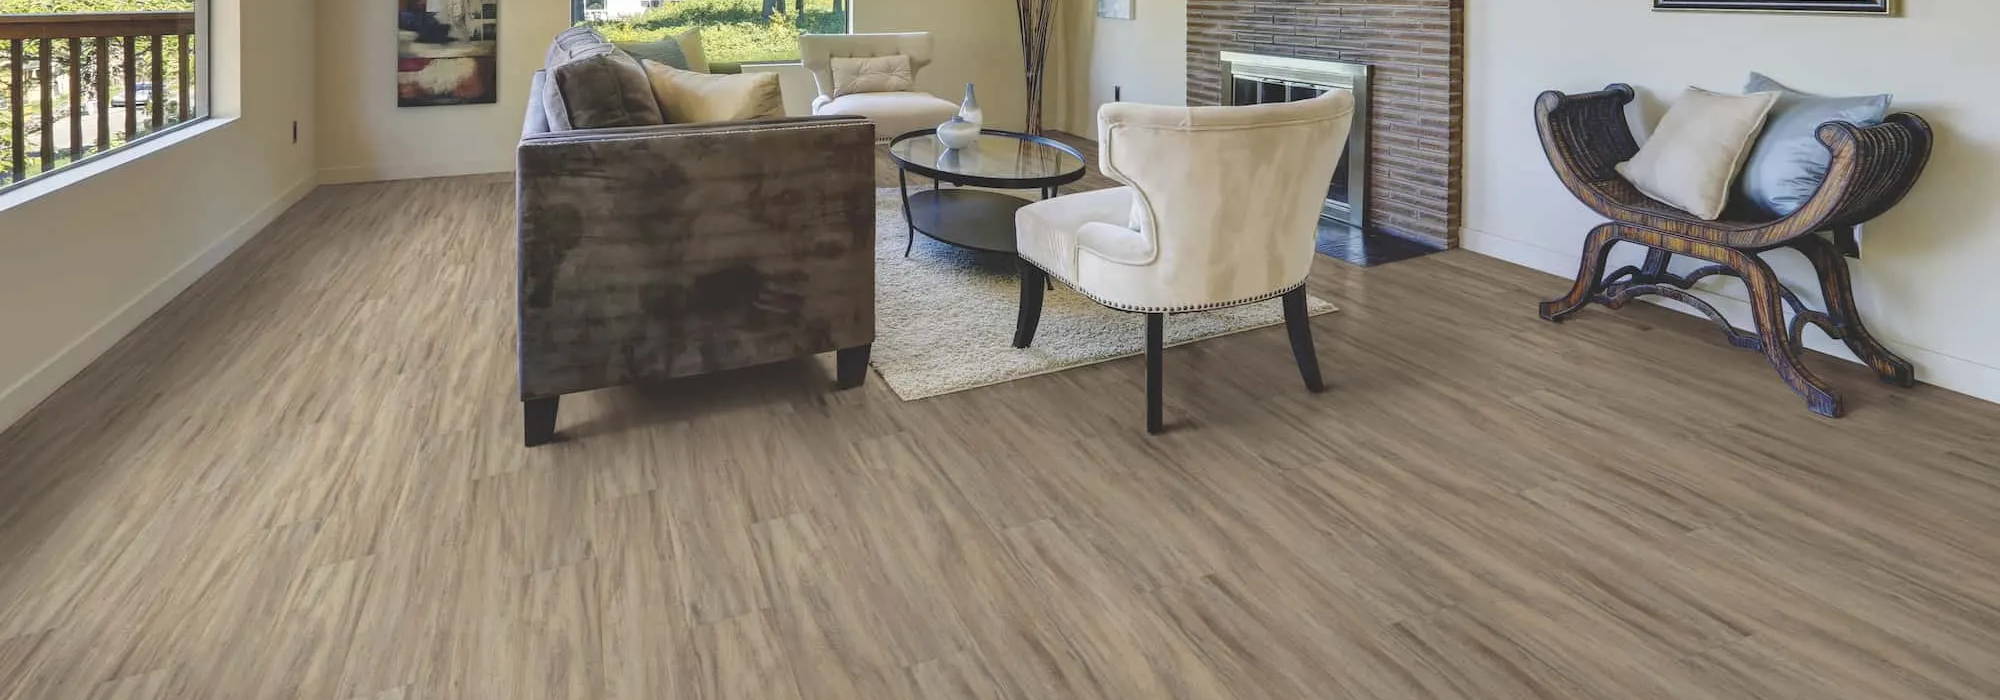 LVT flooring from Kaoud Rugs in West Hartford and Manchester CT